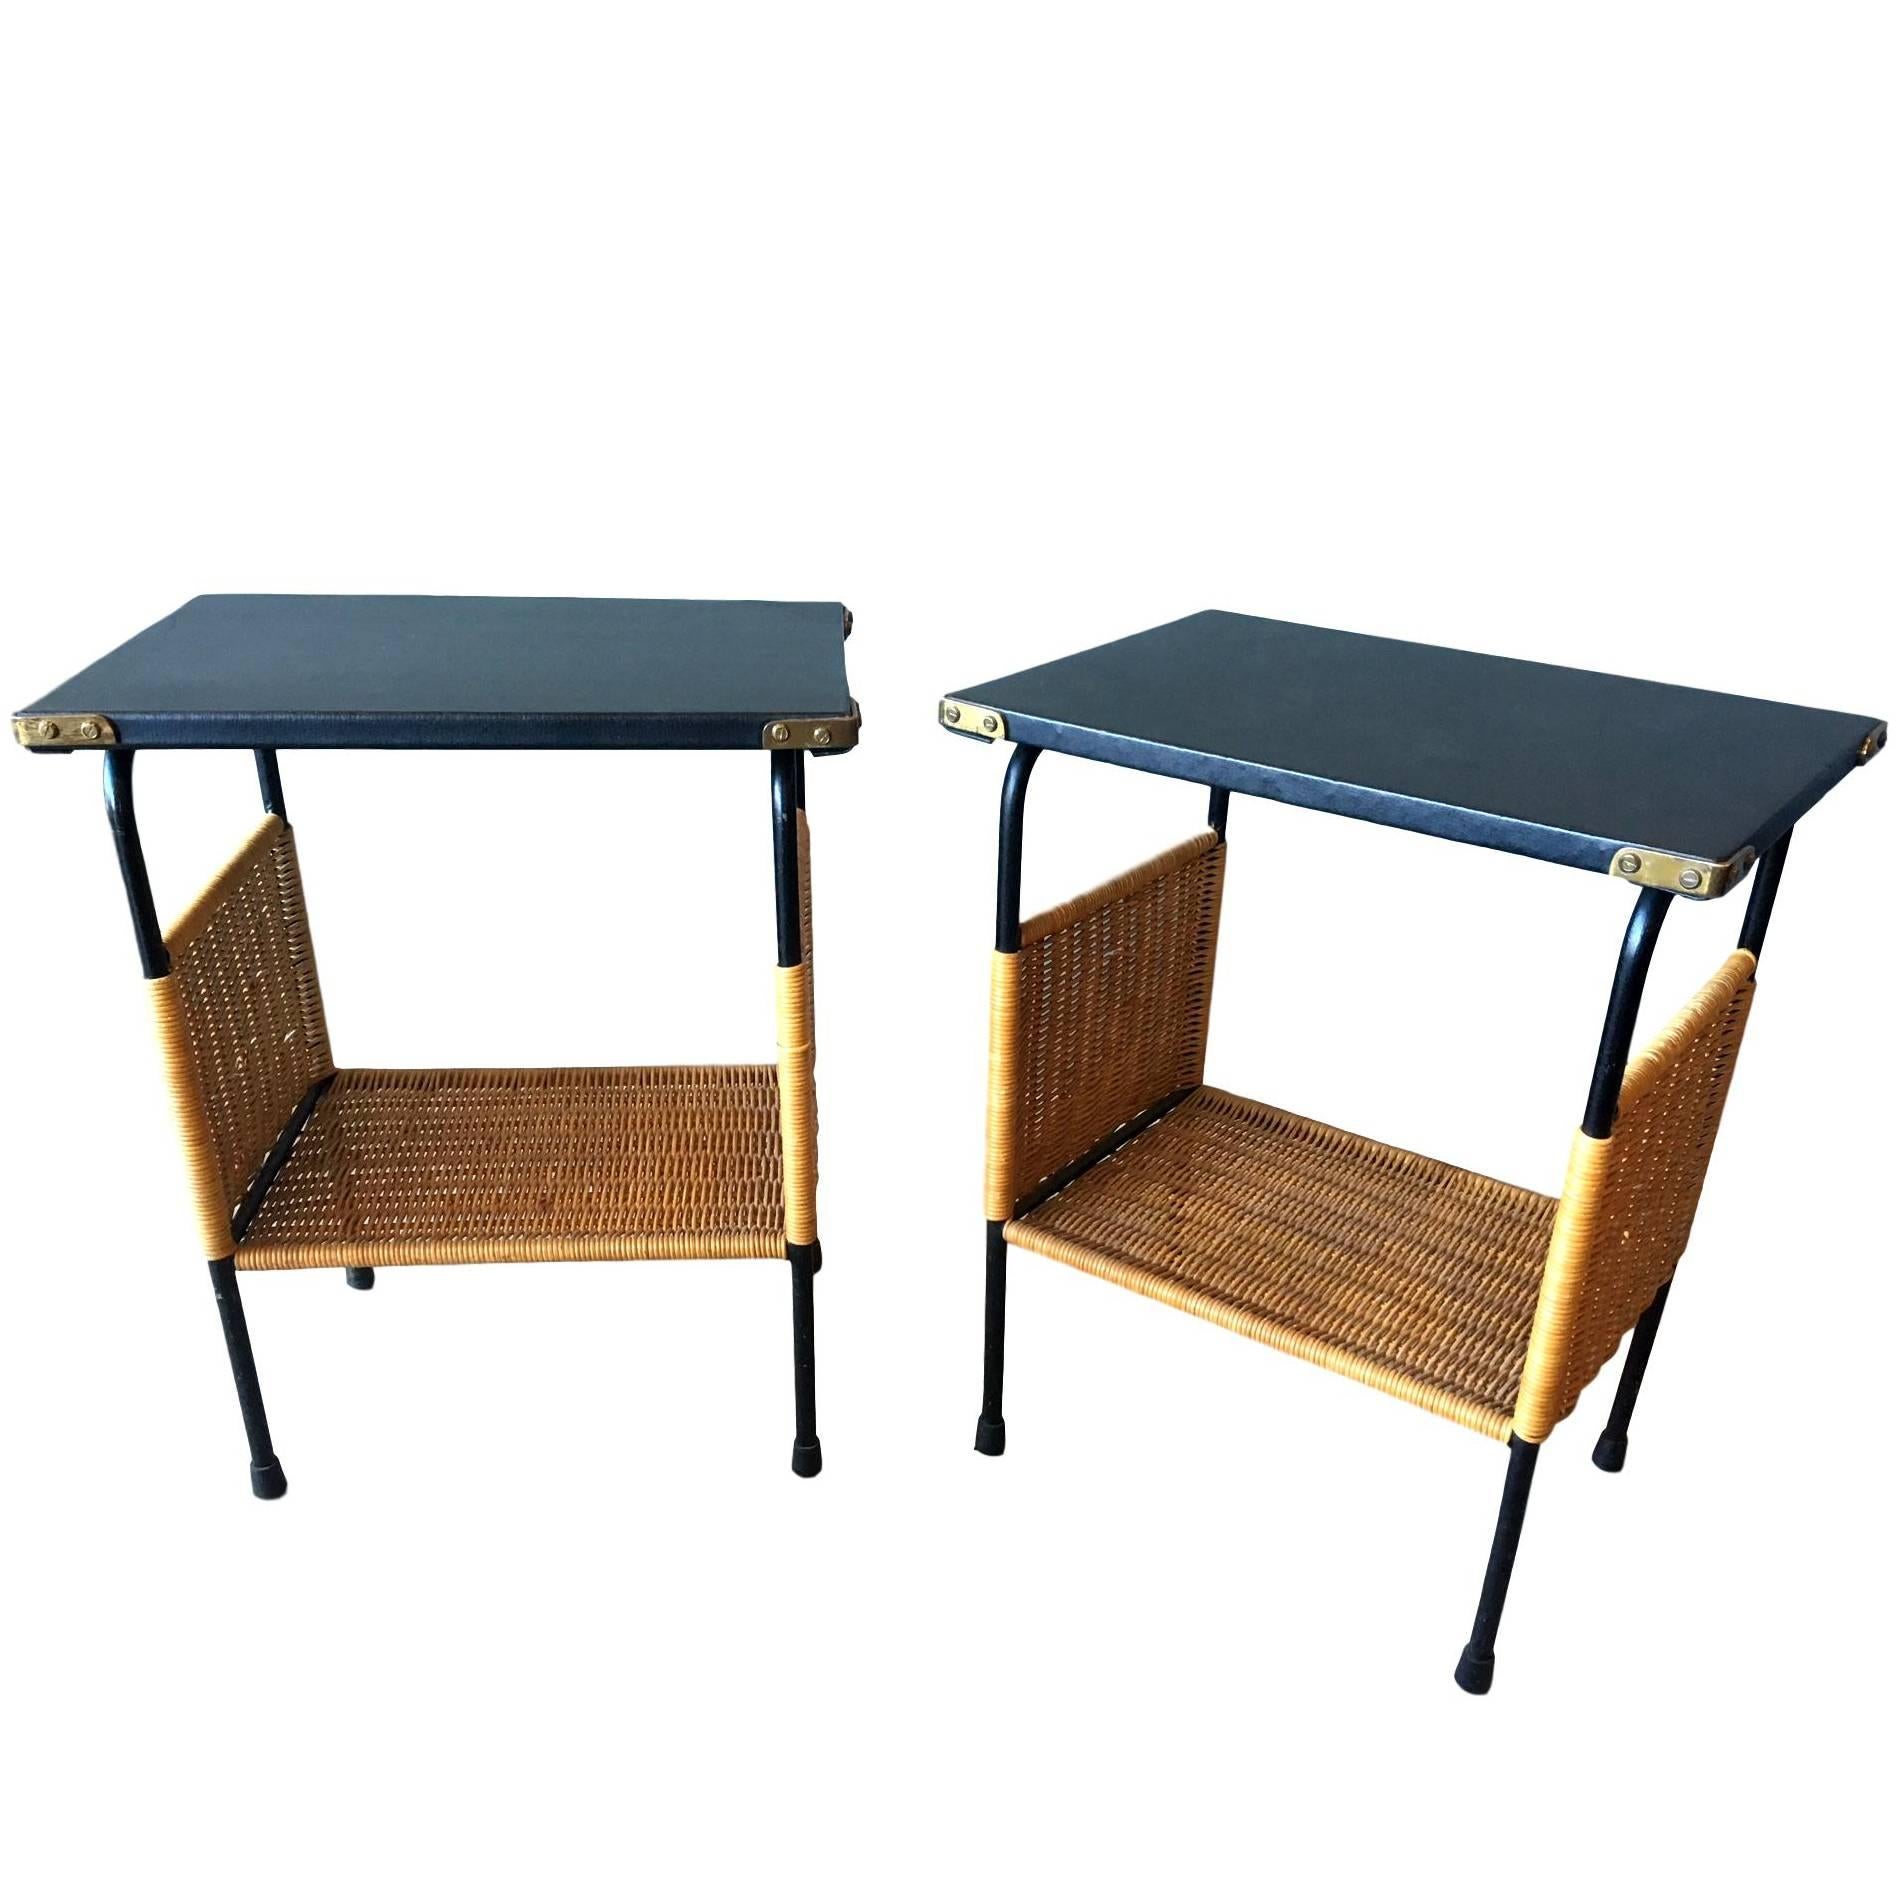 Rare Jacques Adnet Leather and Wicker Side Tables